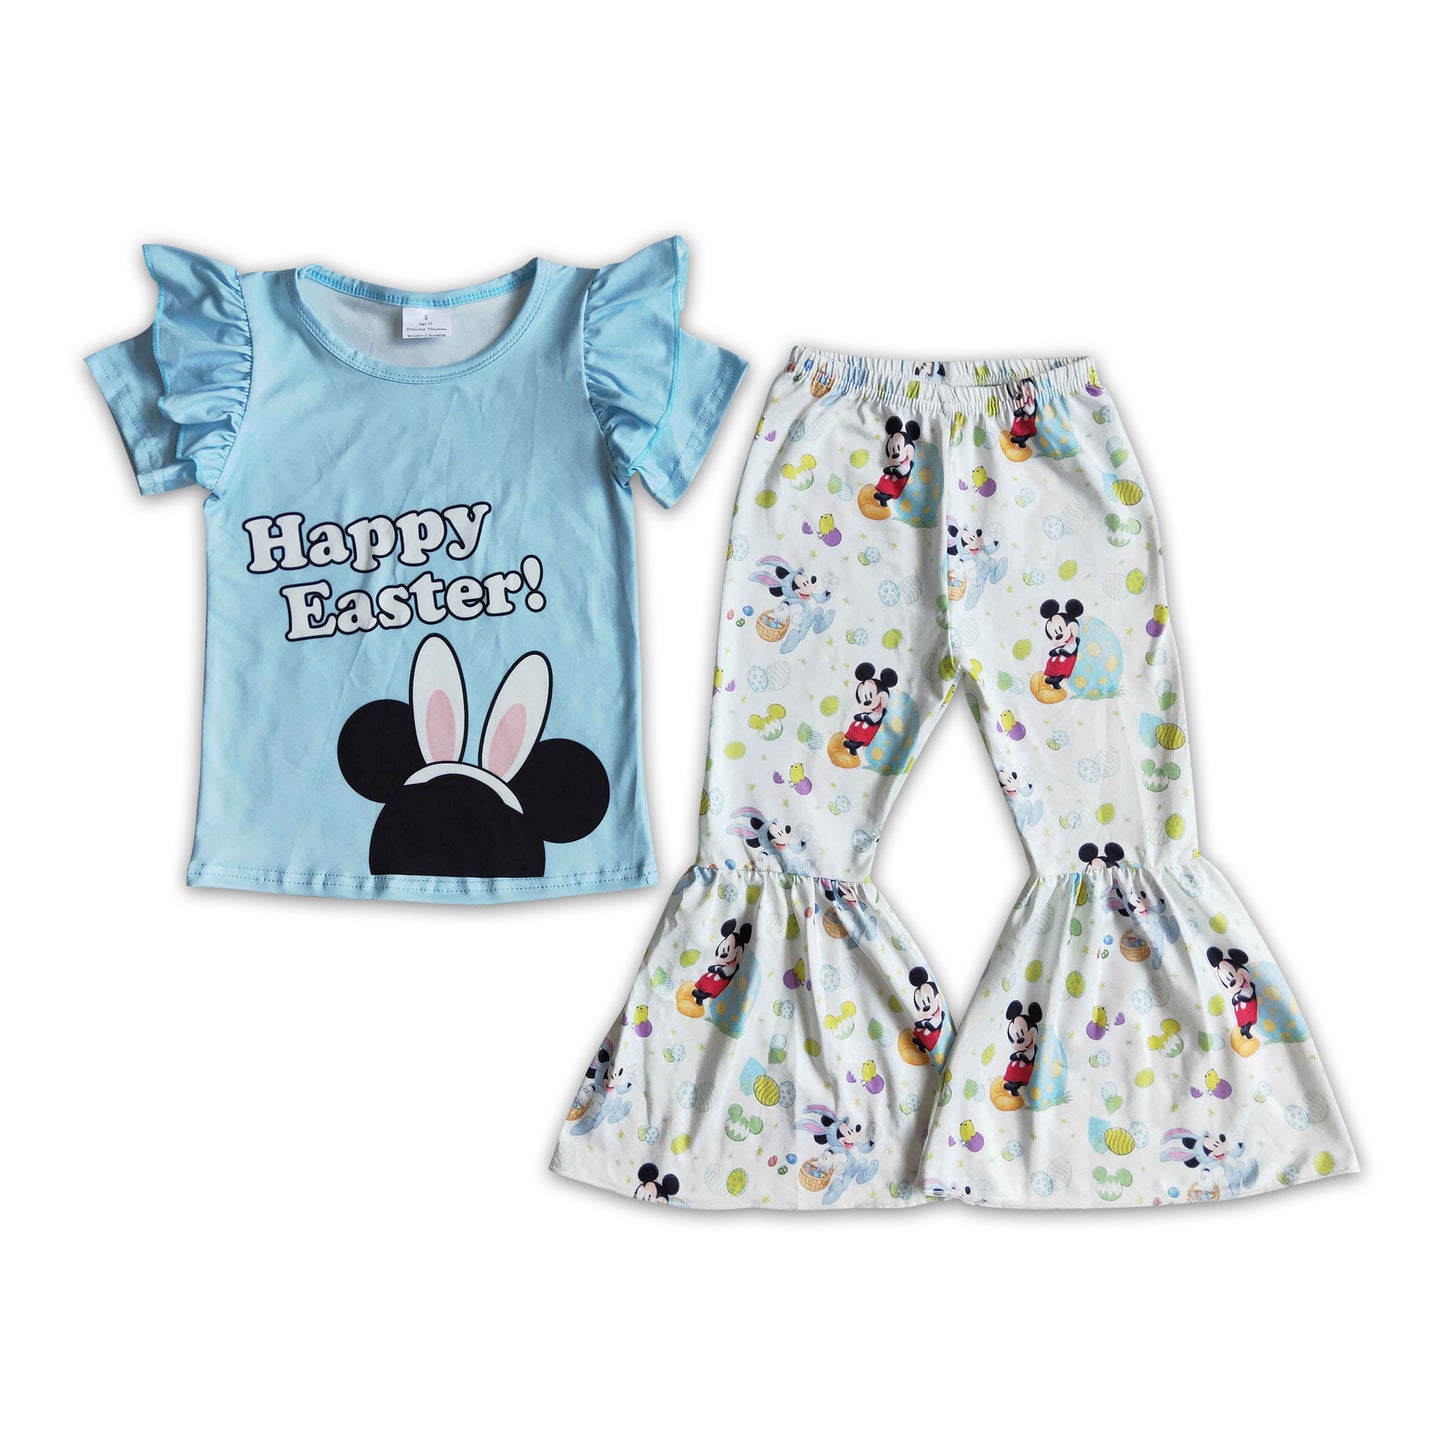 Happy easter short sleeve bell bottom pants set girls cute clothes